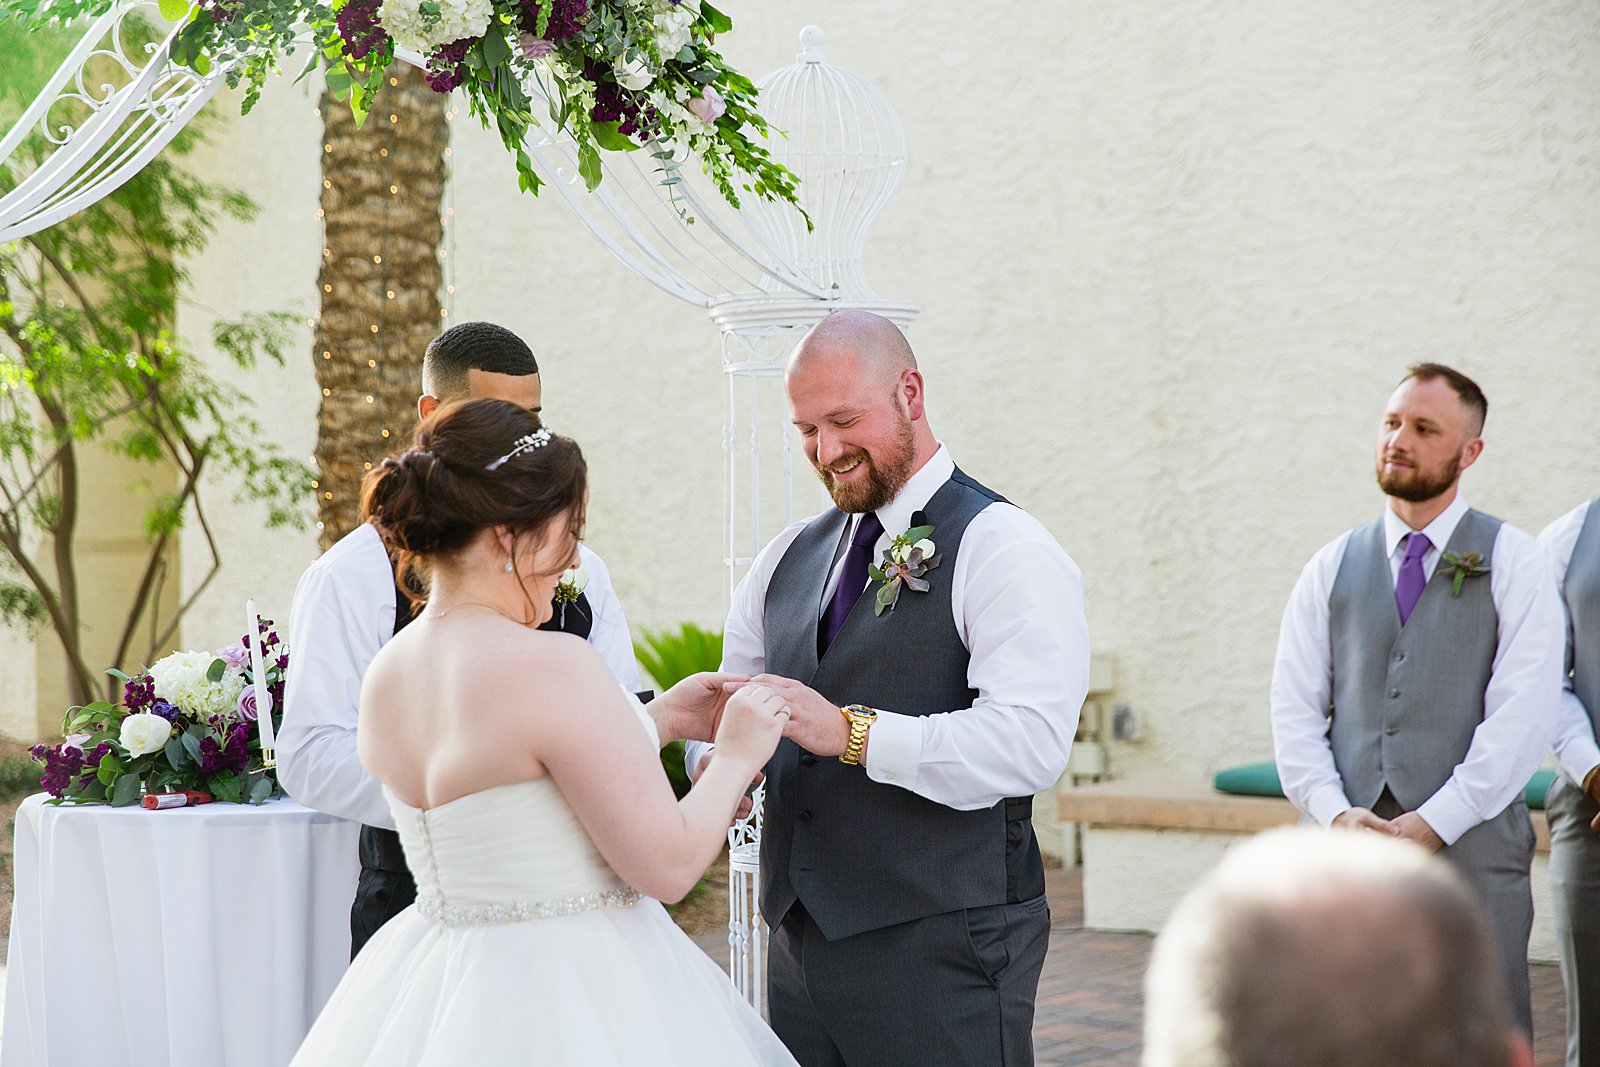 Bride and Groom exchange rings during their wedding ceremony at Arizona Grand Resort by Phoenix wedding photographer PMA Photography.